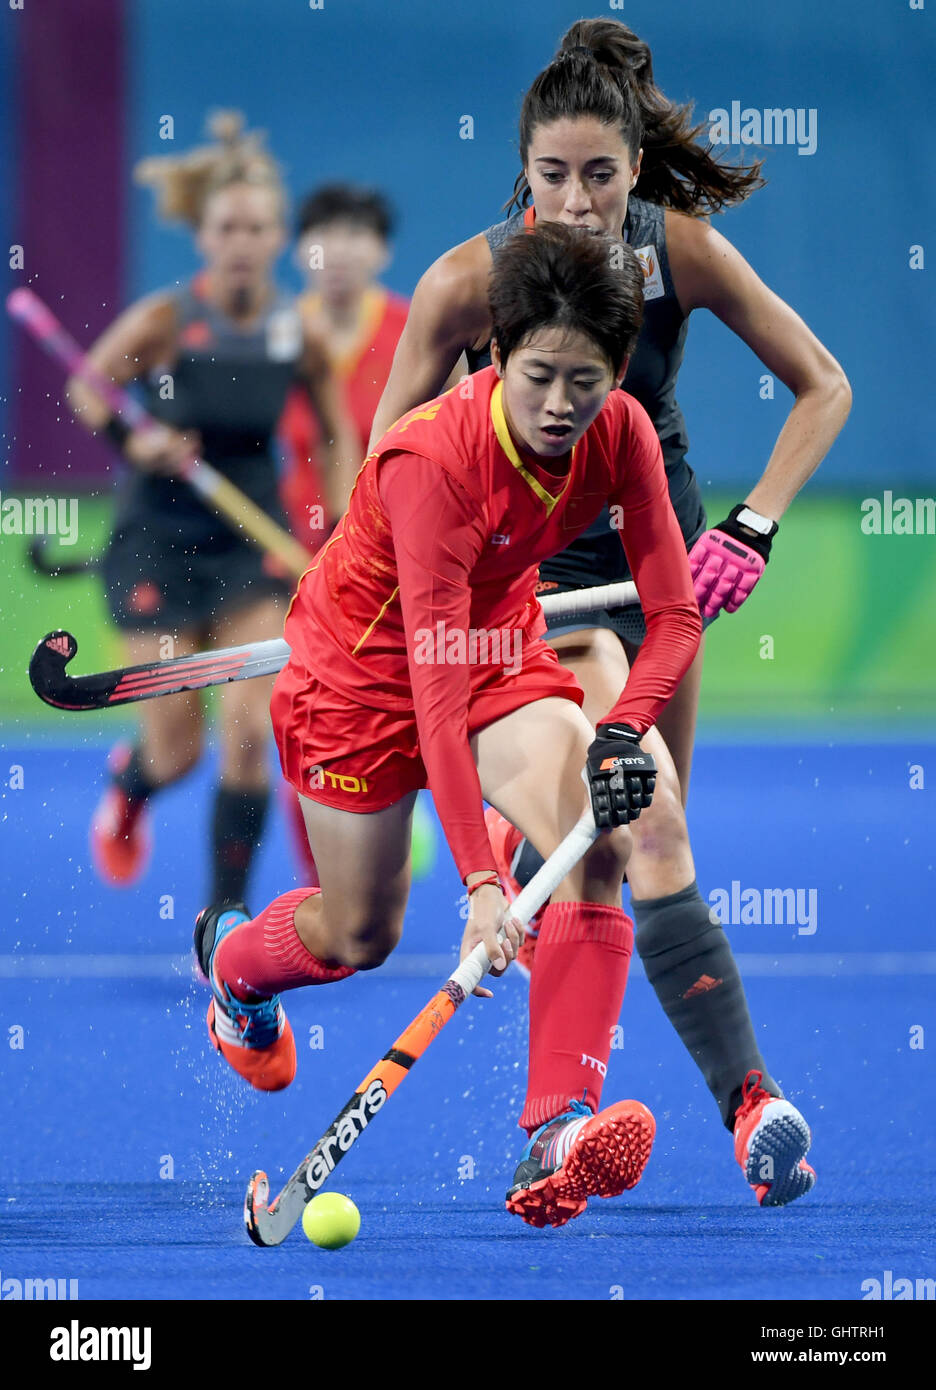 Rio De Janeiro, Brazil. 10th Aug, 2016. Zhang Xiaoxue (front) of China competes during the women's hockey pool A match between China and Netherlands at the 2016 Rio Olympic Games in Rio de Janeiro, Brazil, on Aug. 10, 2016. Netherlands won China with 1:0. Credit:  Wang Yuguo/Xinhua/Alamy Live News Stock Photo